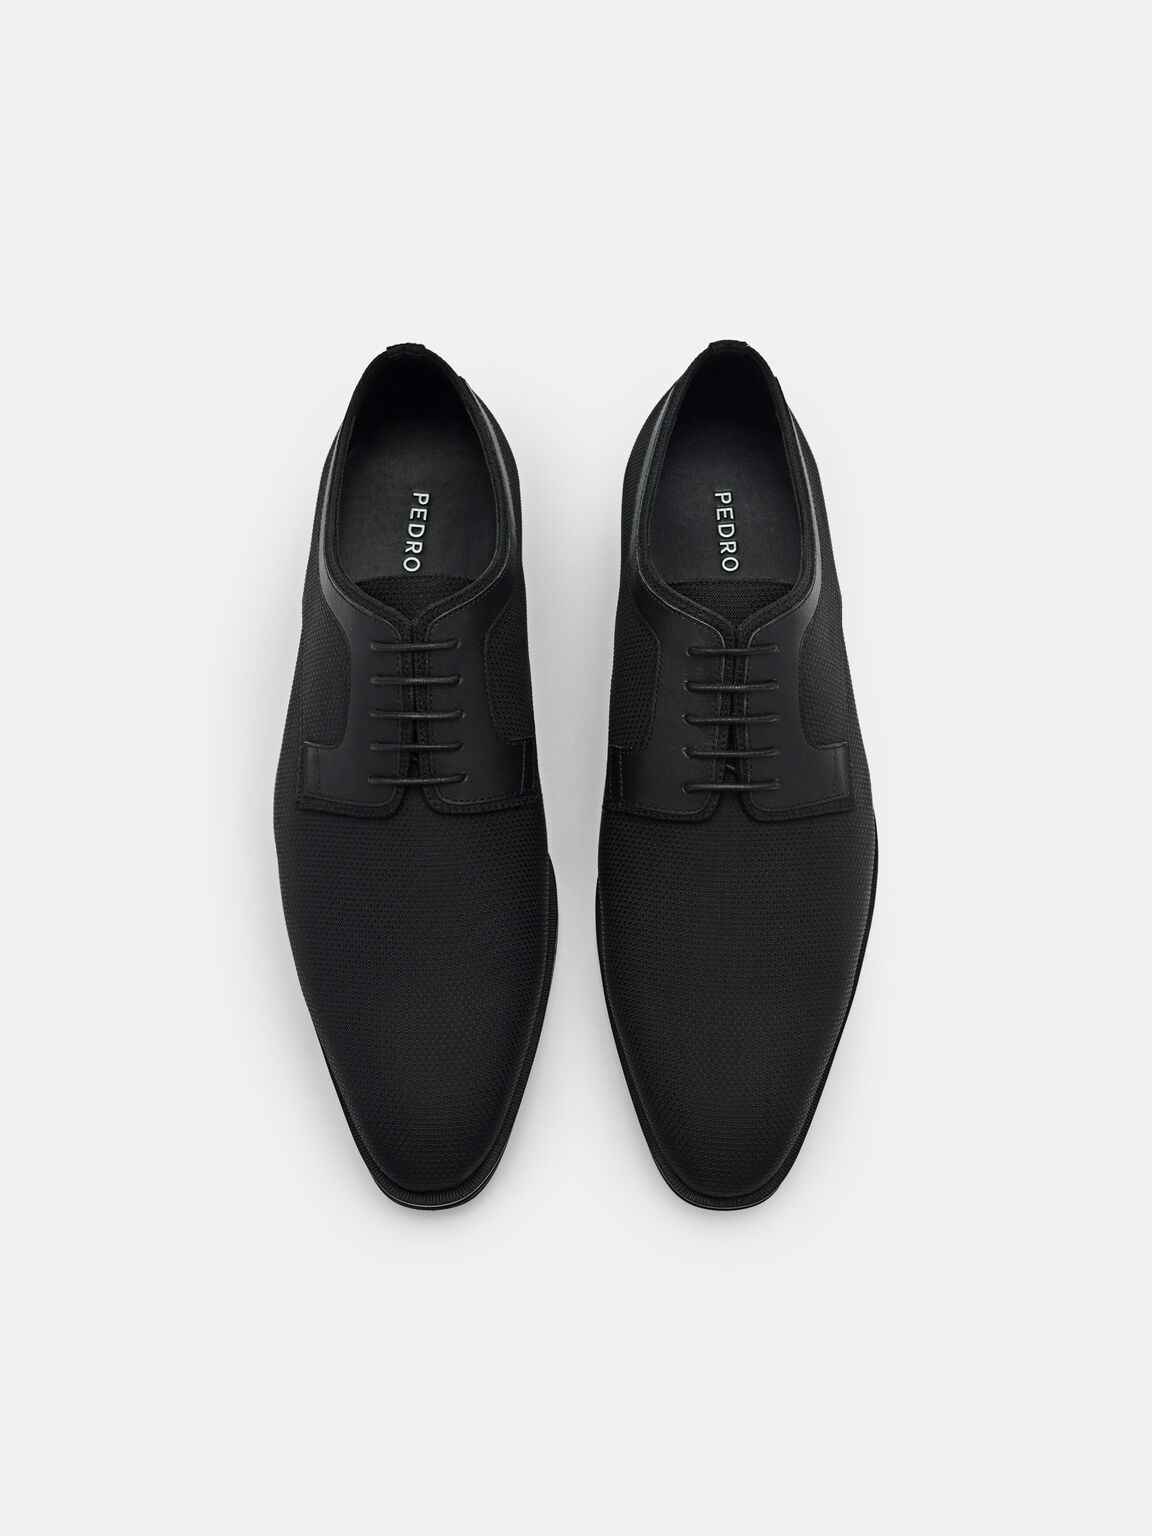 Nylon and Leather Derby Shoes, Black, hi-res